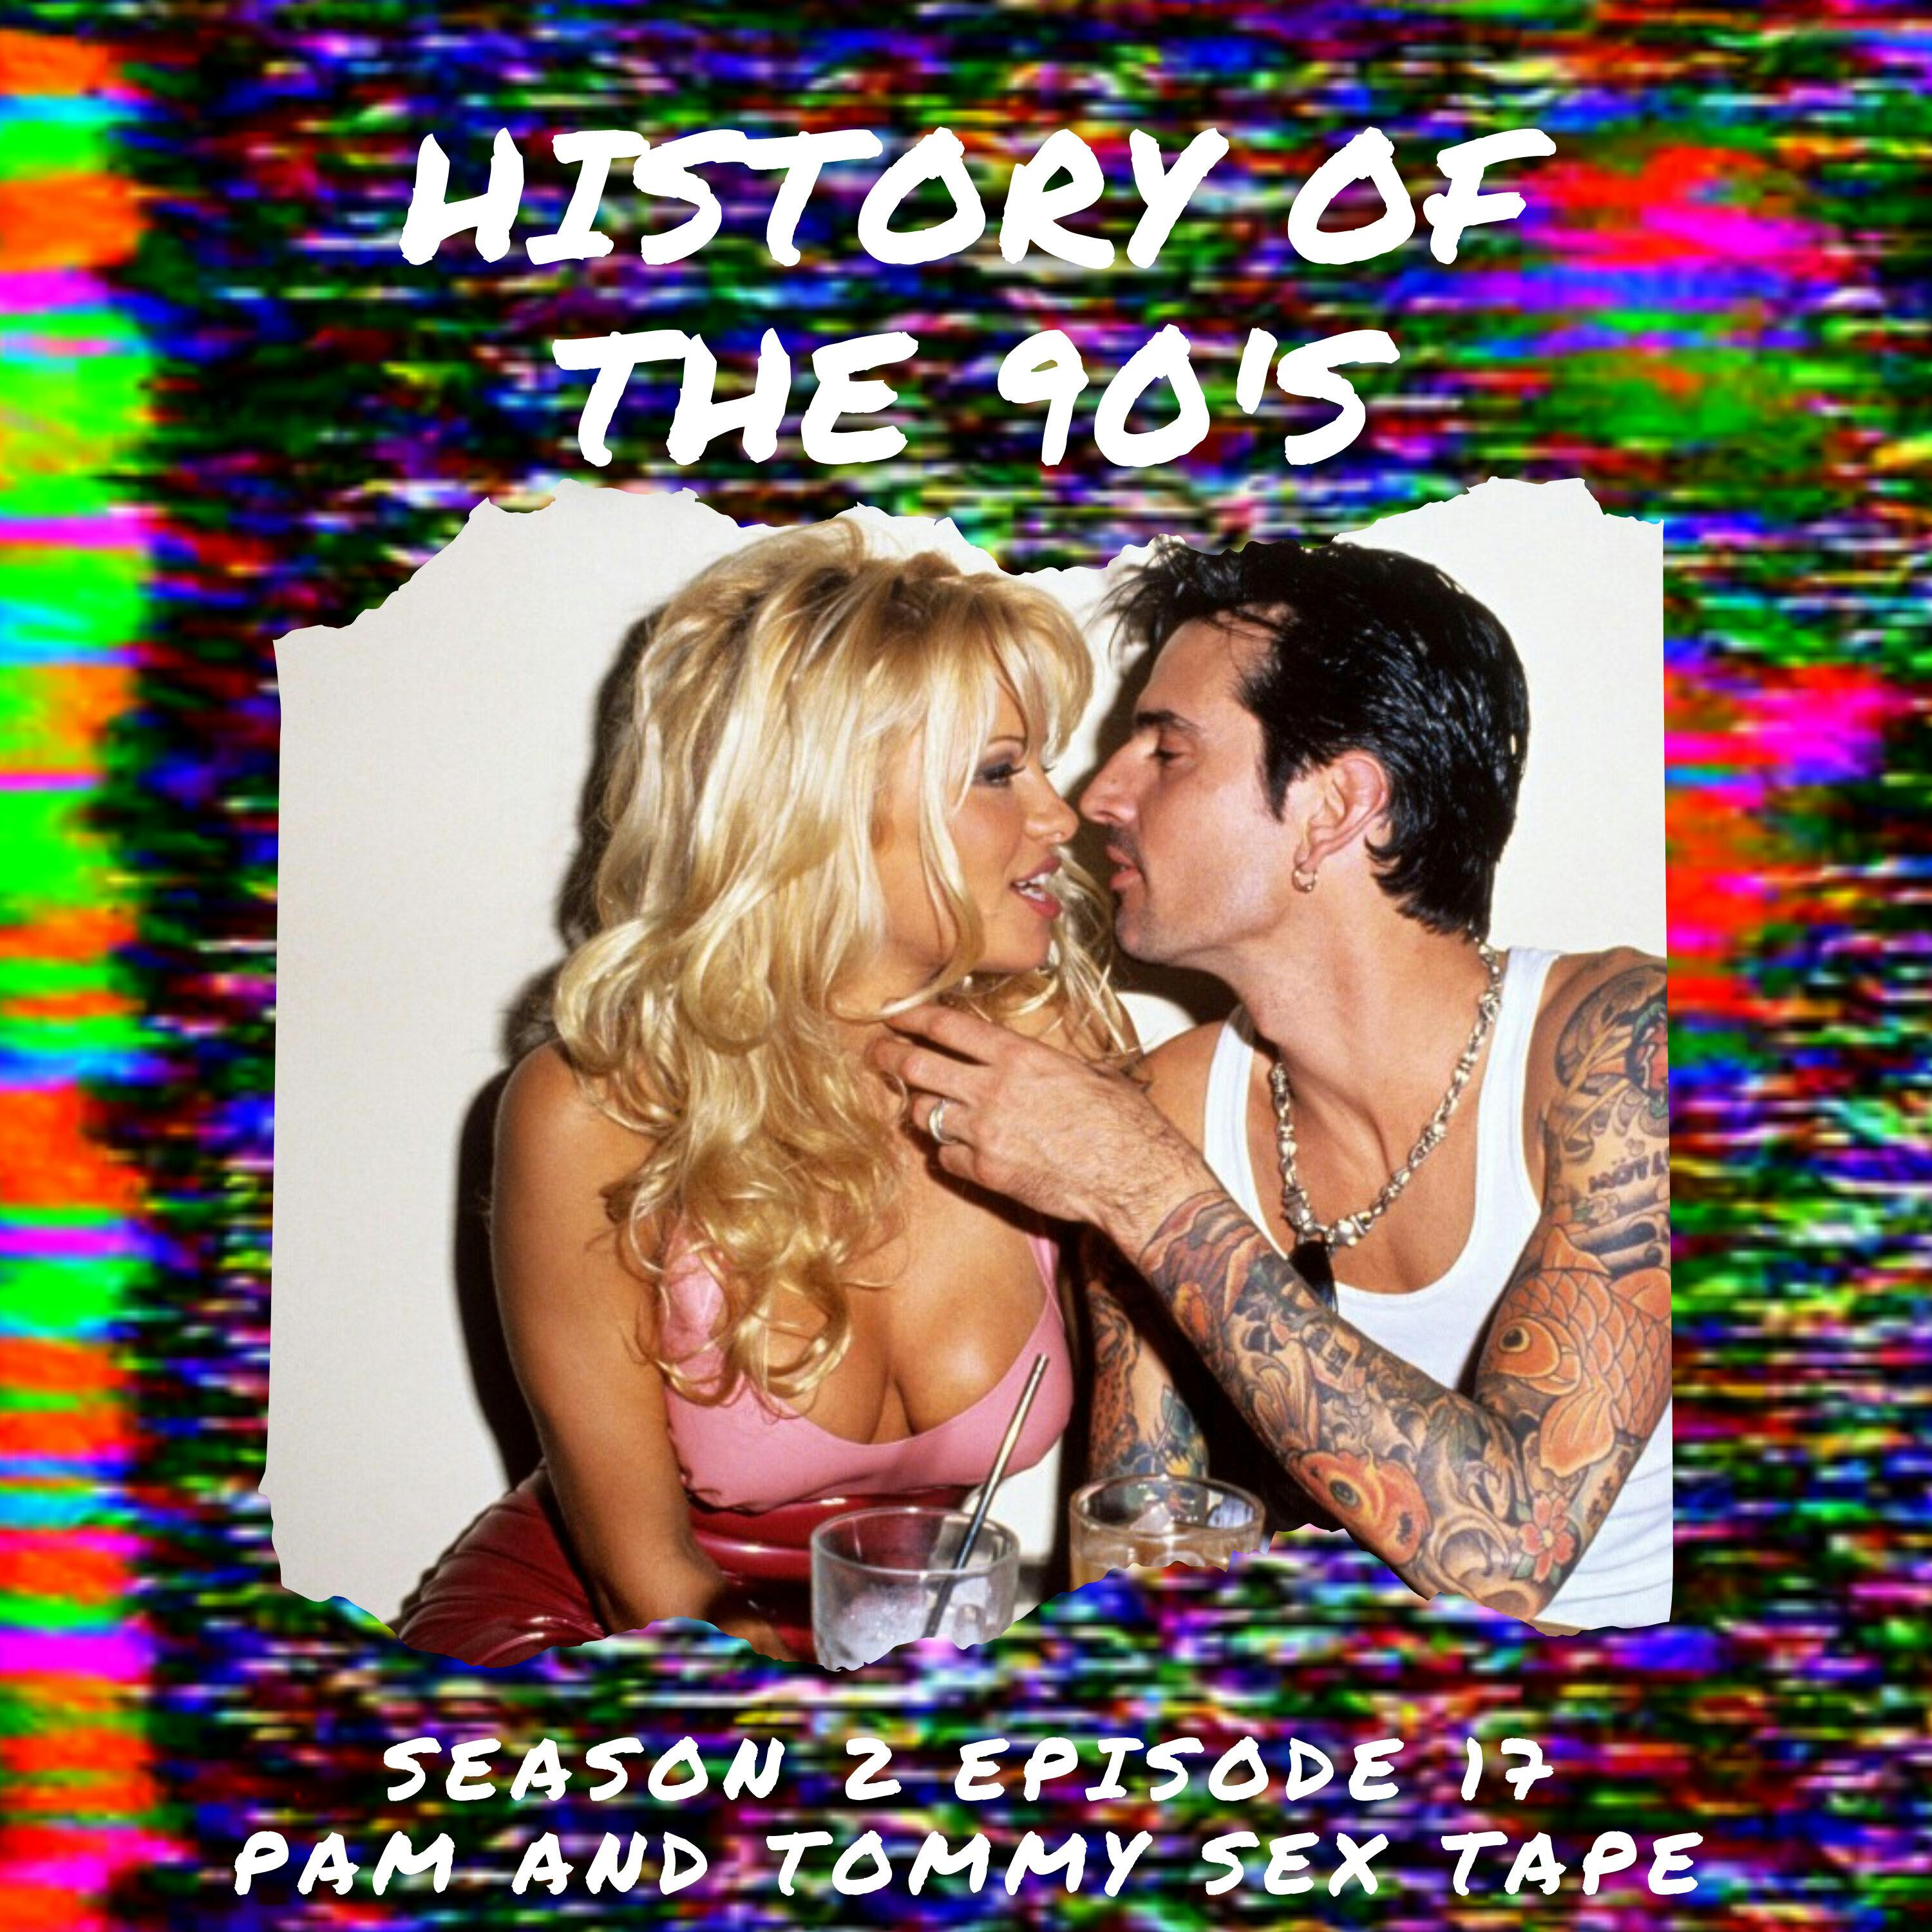 90s Homemade Porn Stolen - History of the 90s â€¢ The Pam and Tommy Sex Tape | 77 â€¢ Listen on Fountain